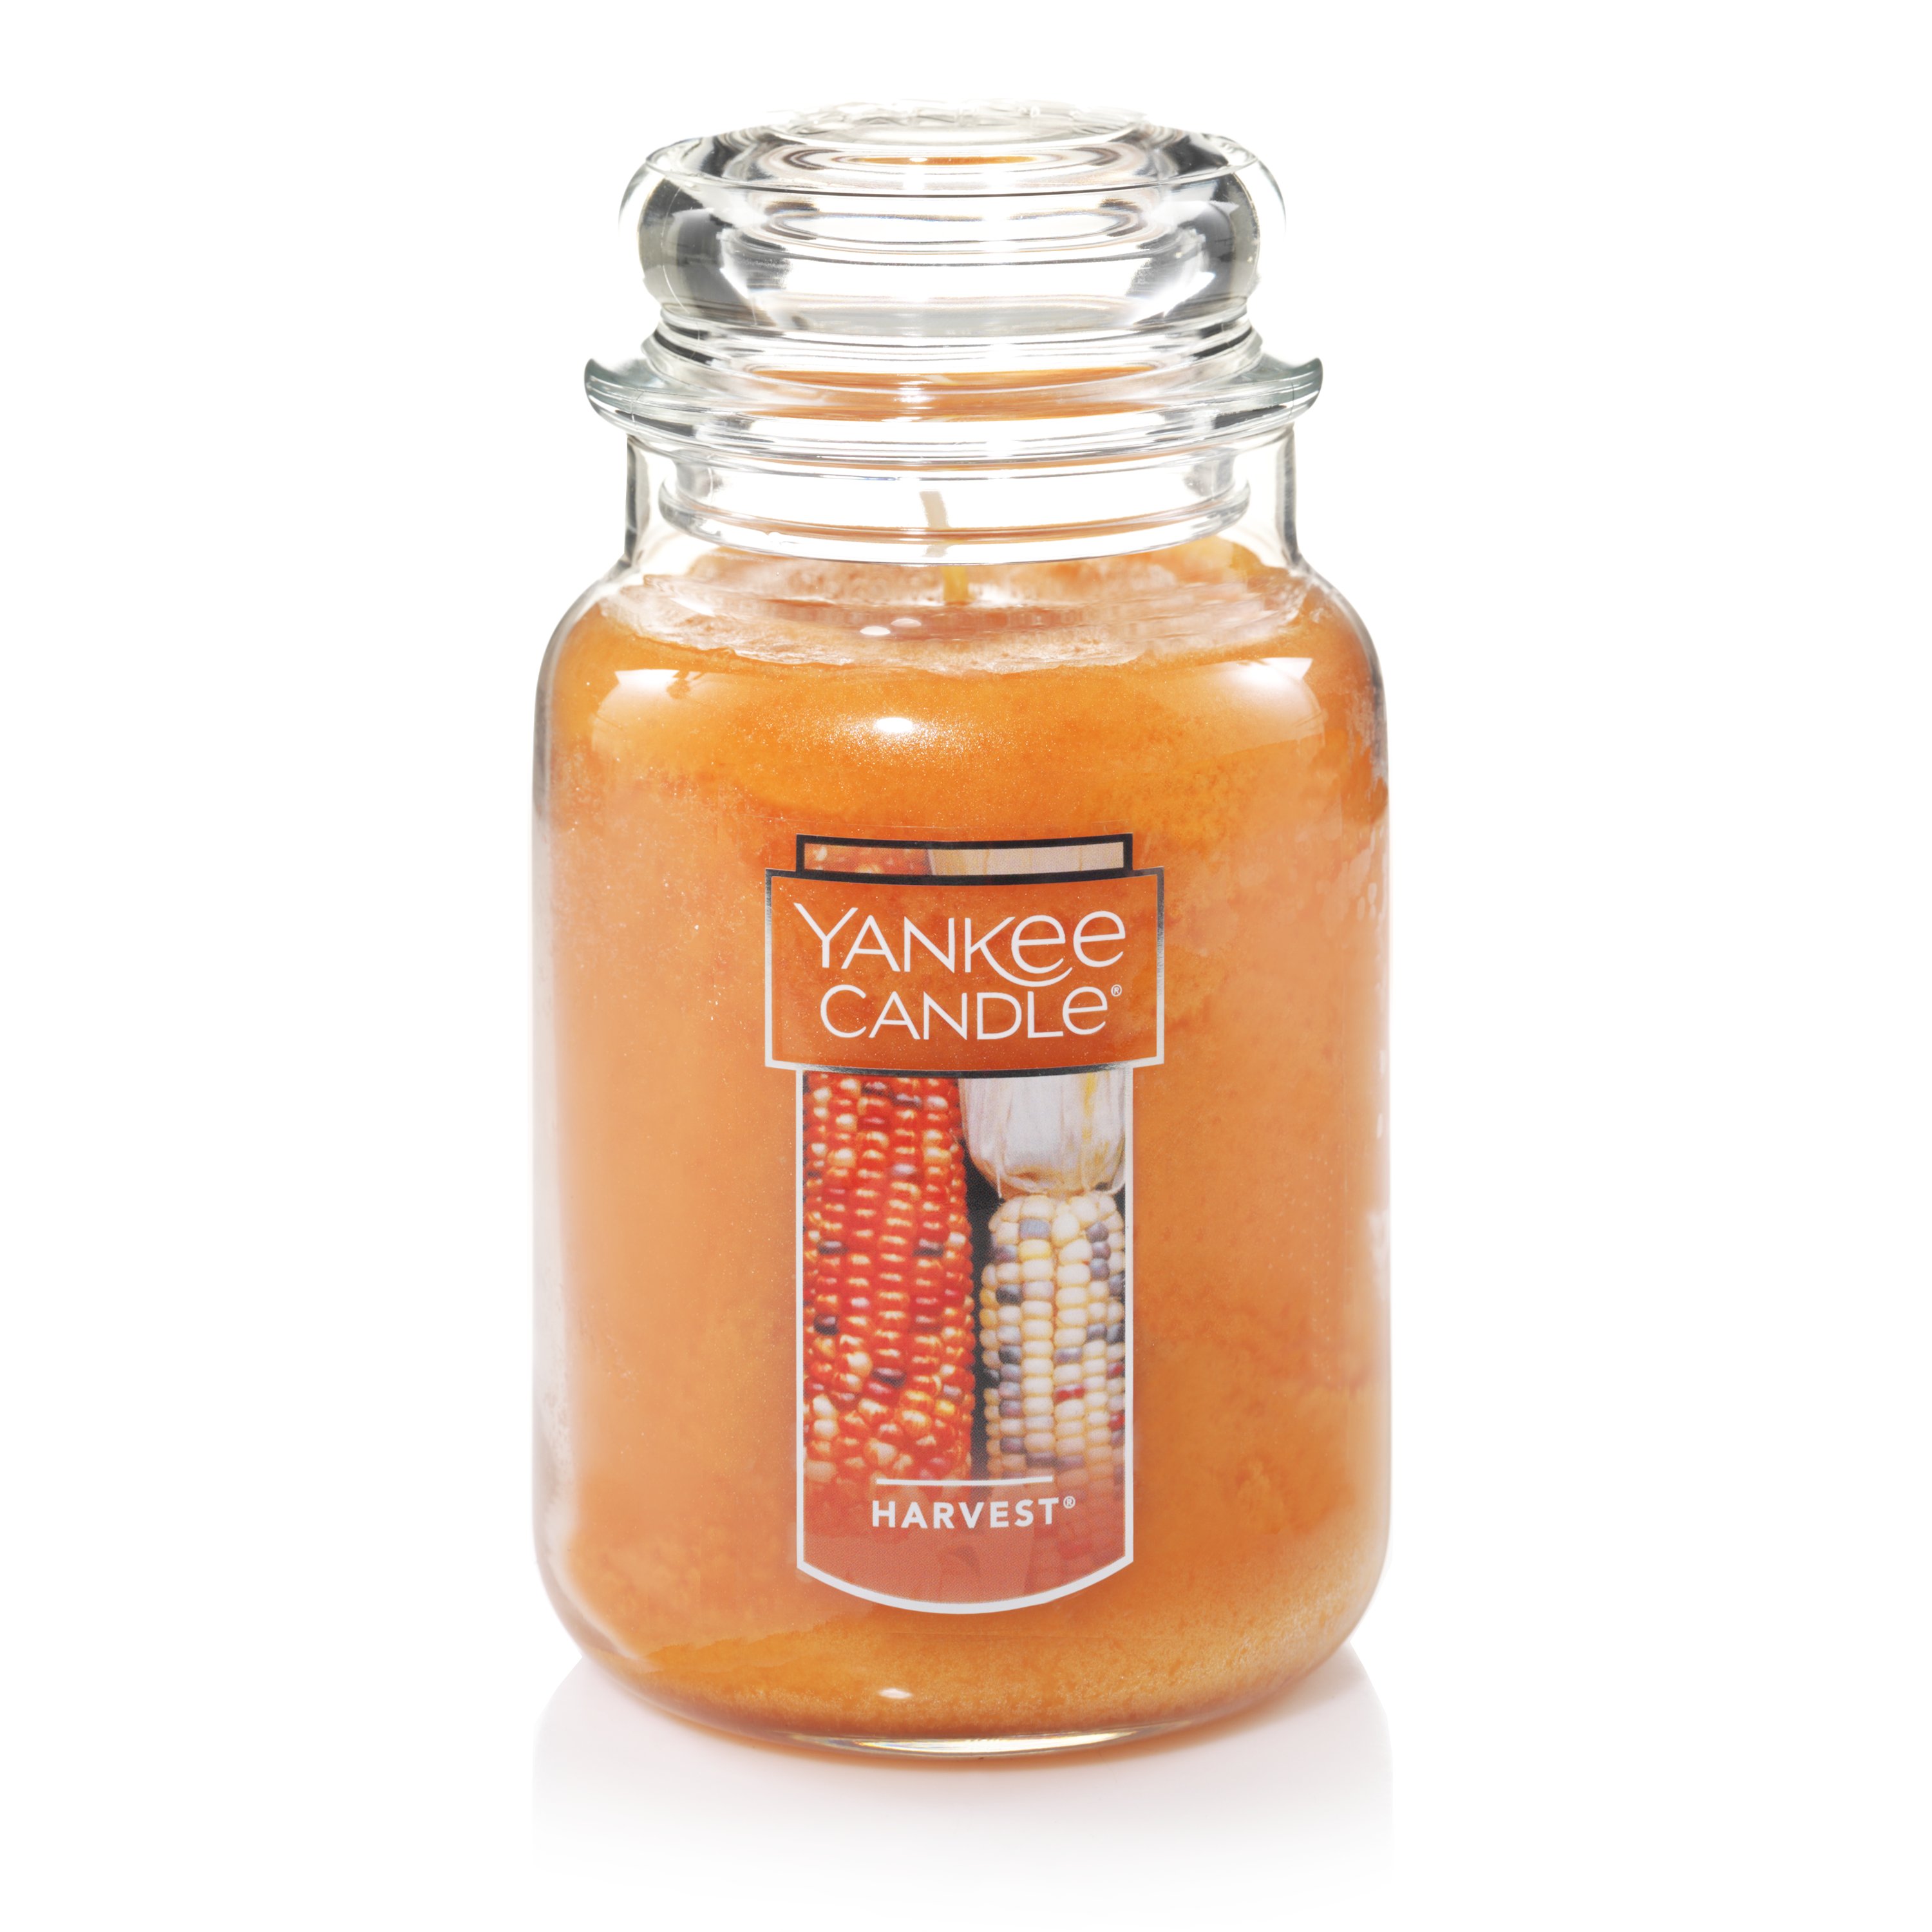 Yankee Candle 22oz 623g Large Jar Spicy Pepperberry & Spruce Deerfield VHTF 